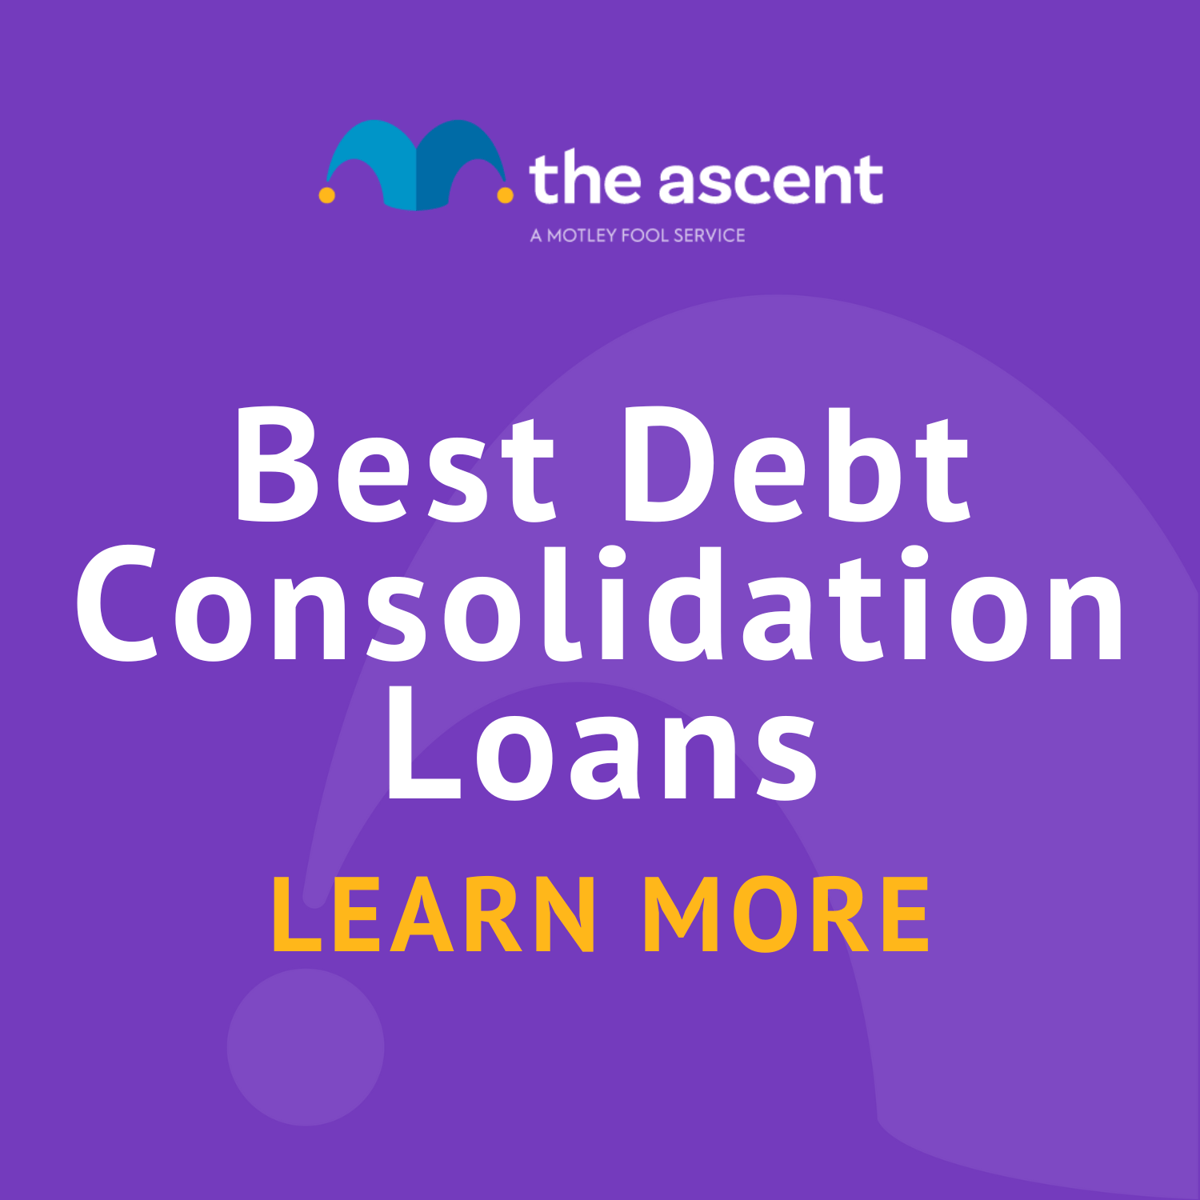 Best Debt Consolidation Loans NcpEgEH Fy0mgd3 ?width=1200